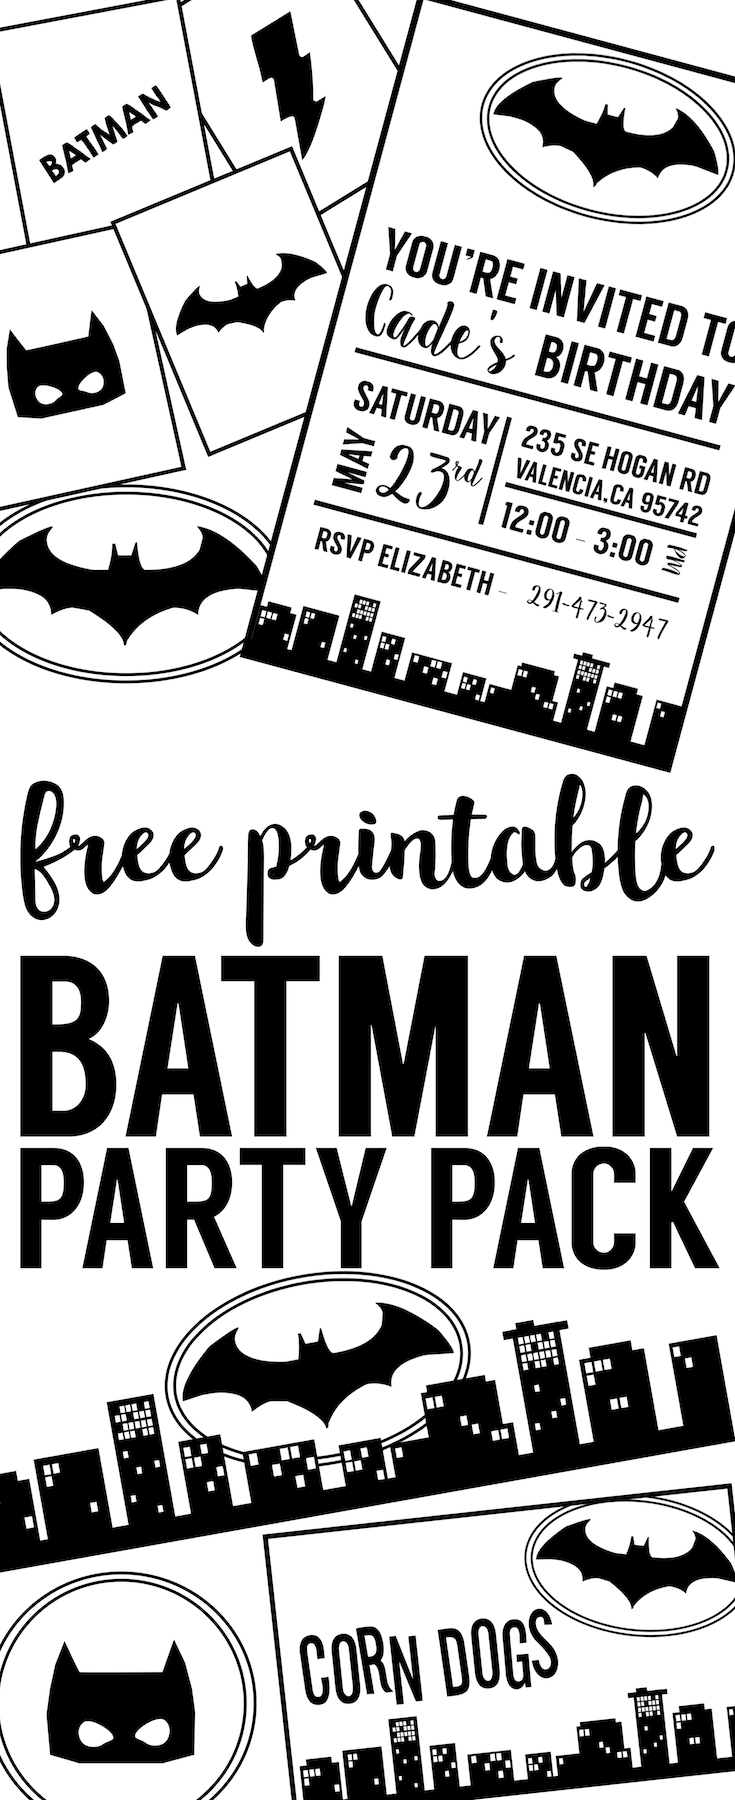 Free Batman Party Printables for a DIY Batman Birthday party, Halloween party, baby shower. Easy cheap Batman party decor. Batman party free printables. 